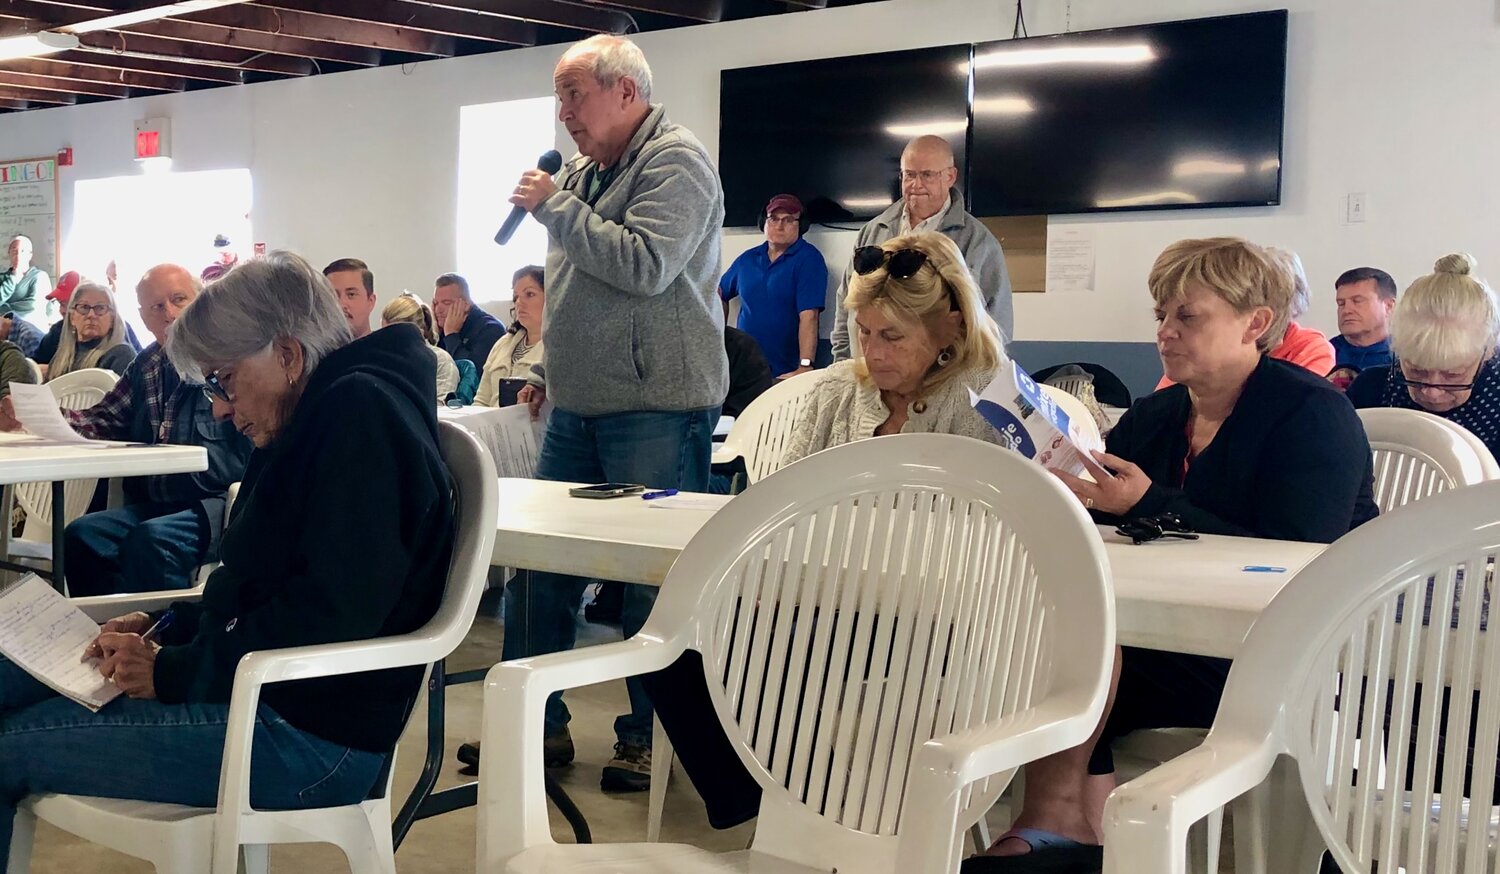 Prudence Island residents discussed numerous issues with the Portsmouth Town Council during Saturday's meeting, including ferry parking, road maintenance, flooding and more.